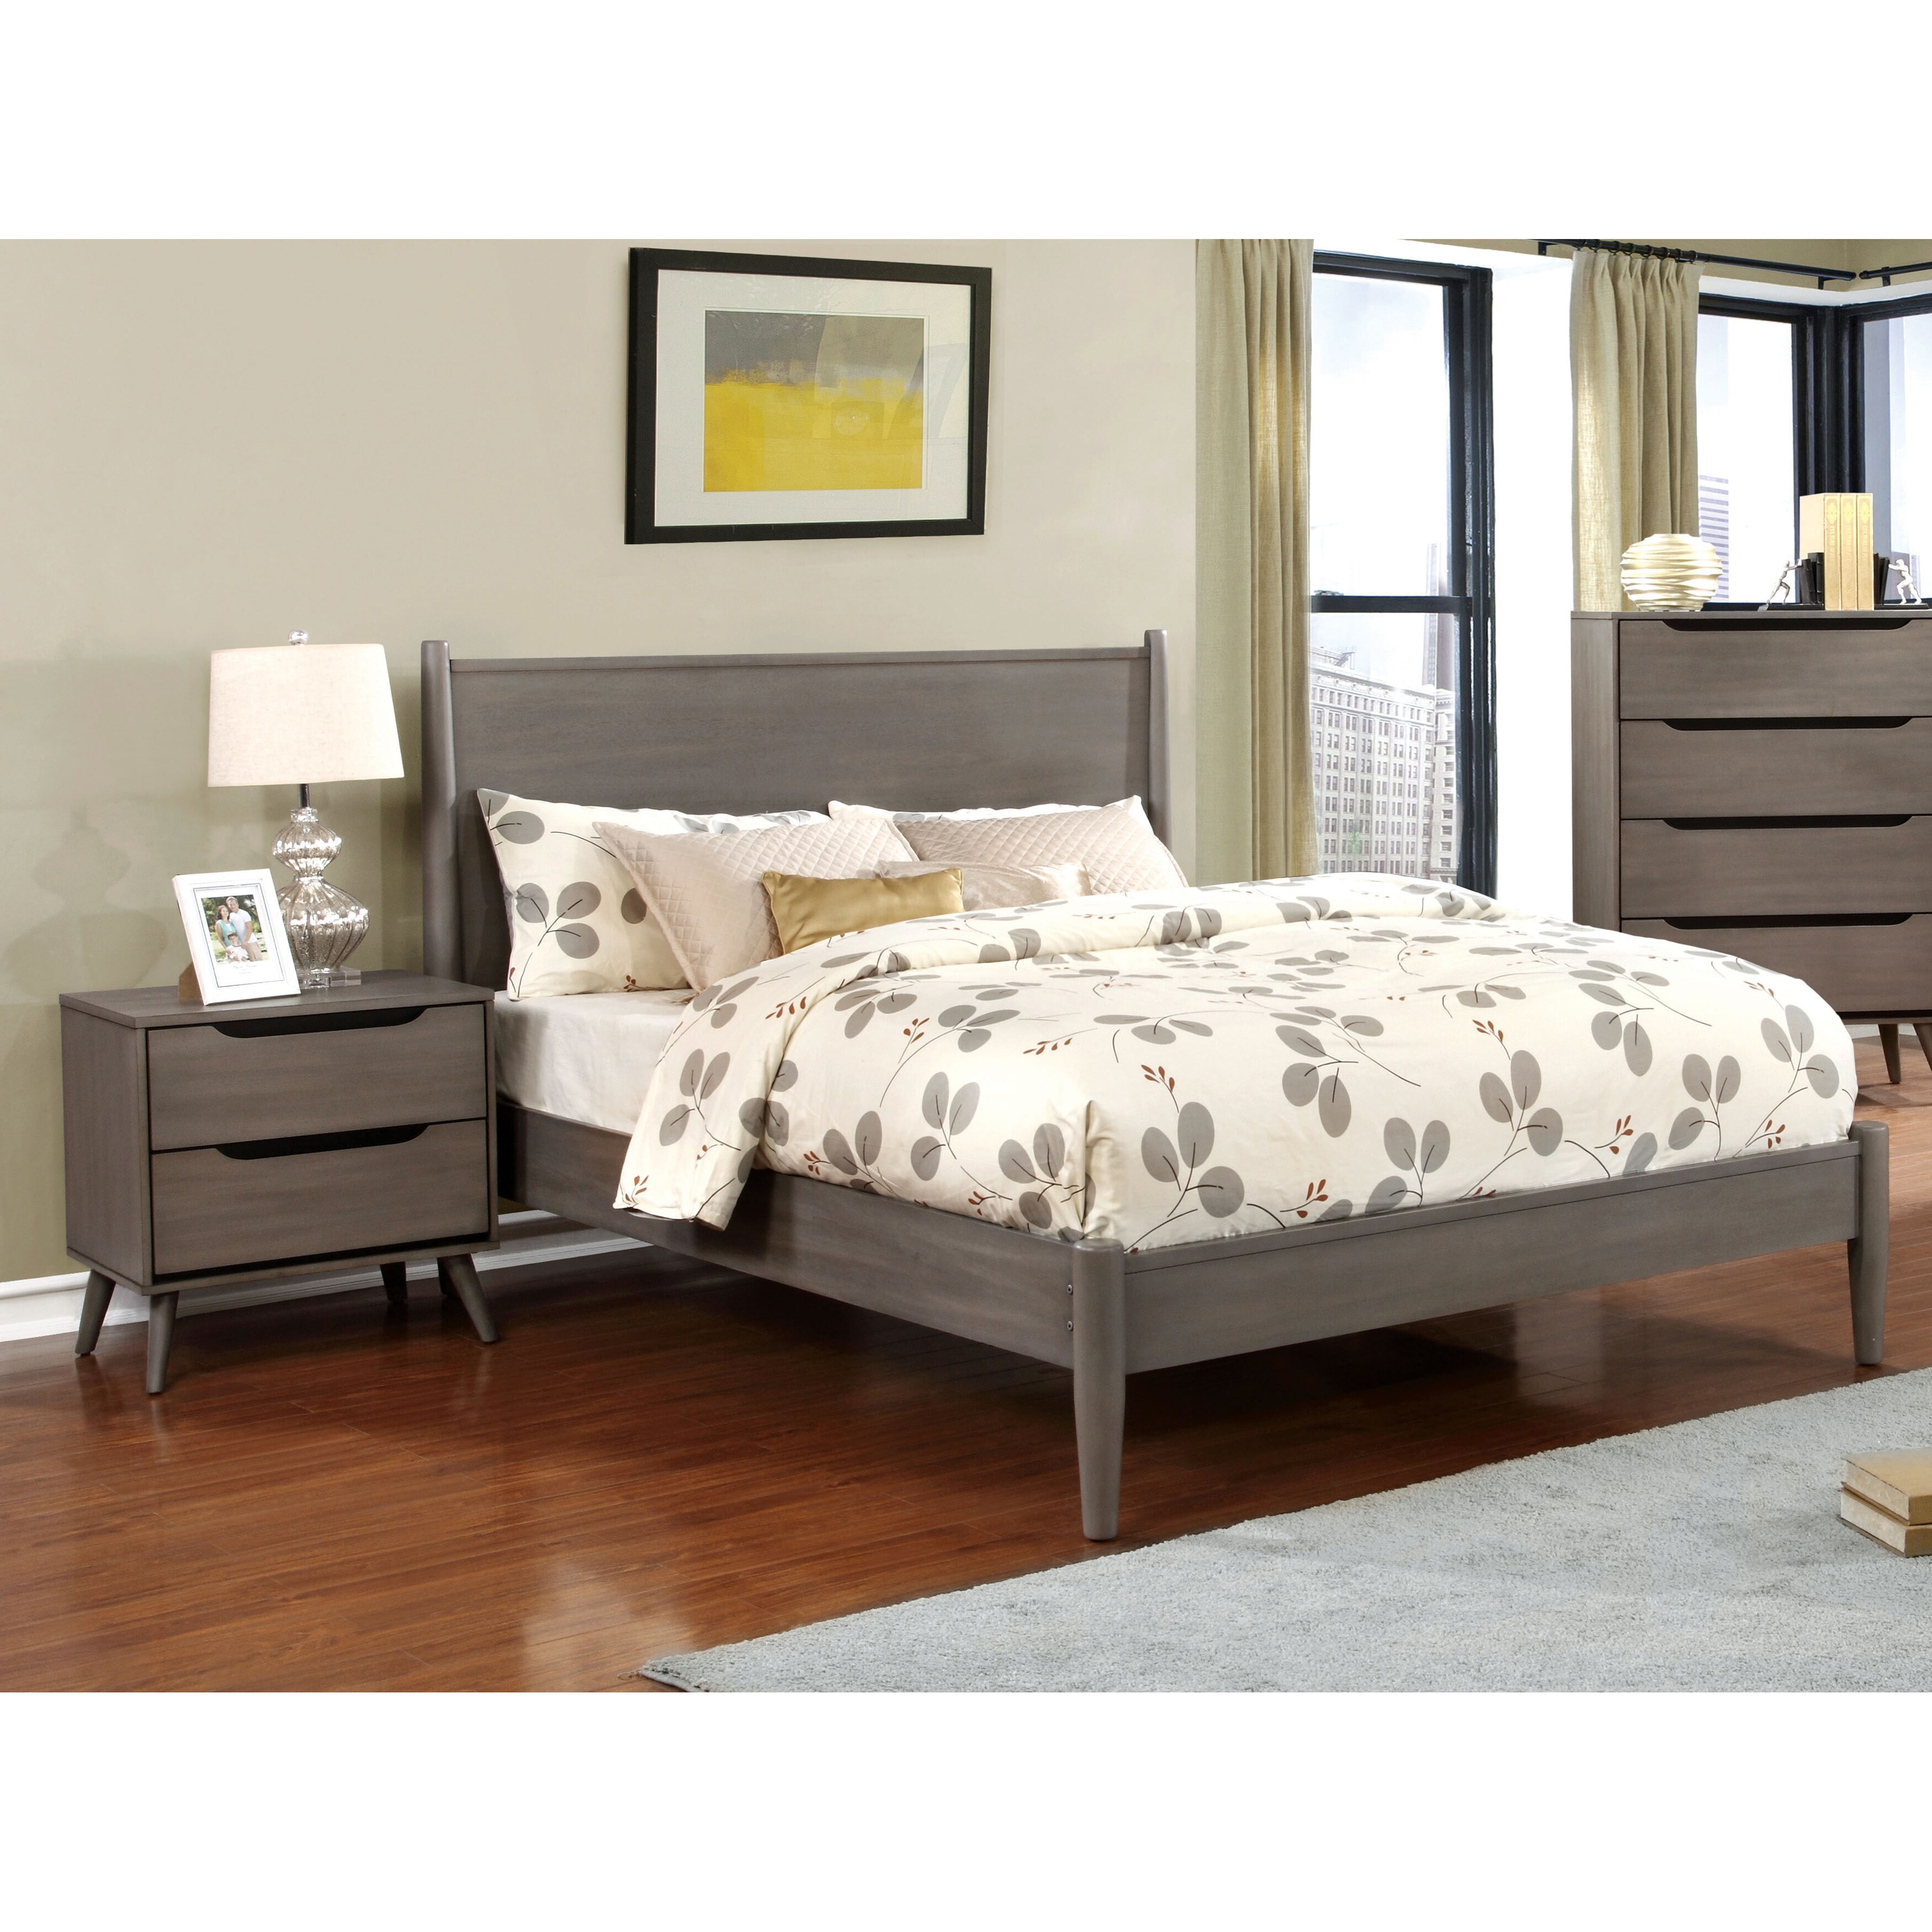 Shop Furniture Of America Corrine Grey Mid Century Modern 2 Piece Bed And Nightstand Set Overstock 21895336 California King,2 Chandelier Over Dining Table